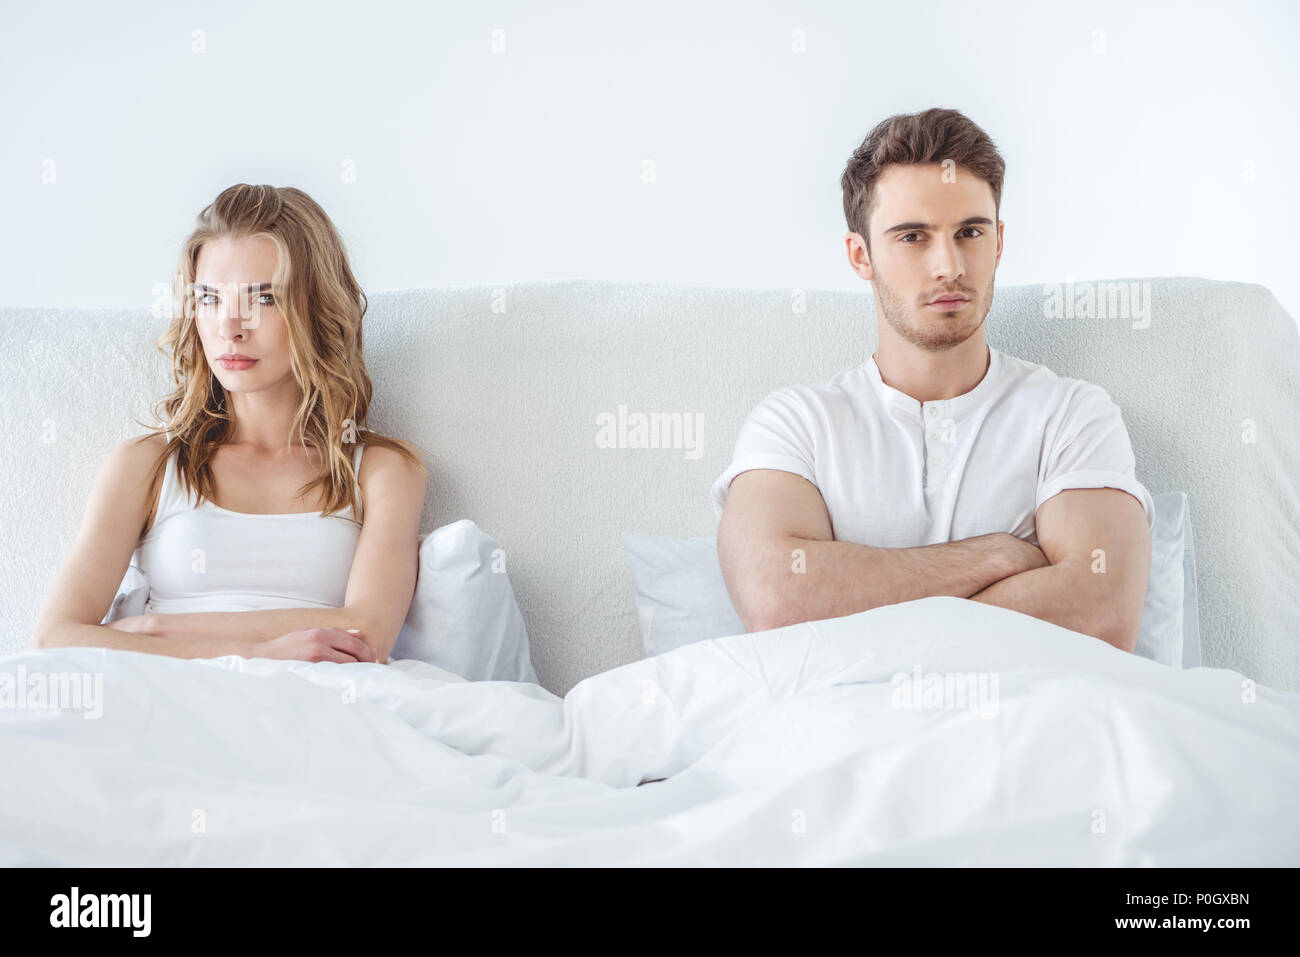 young dissatisfied couple lying in bed, relationship difficulties concept Stock Photo